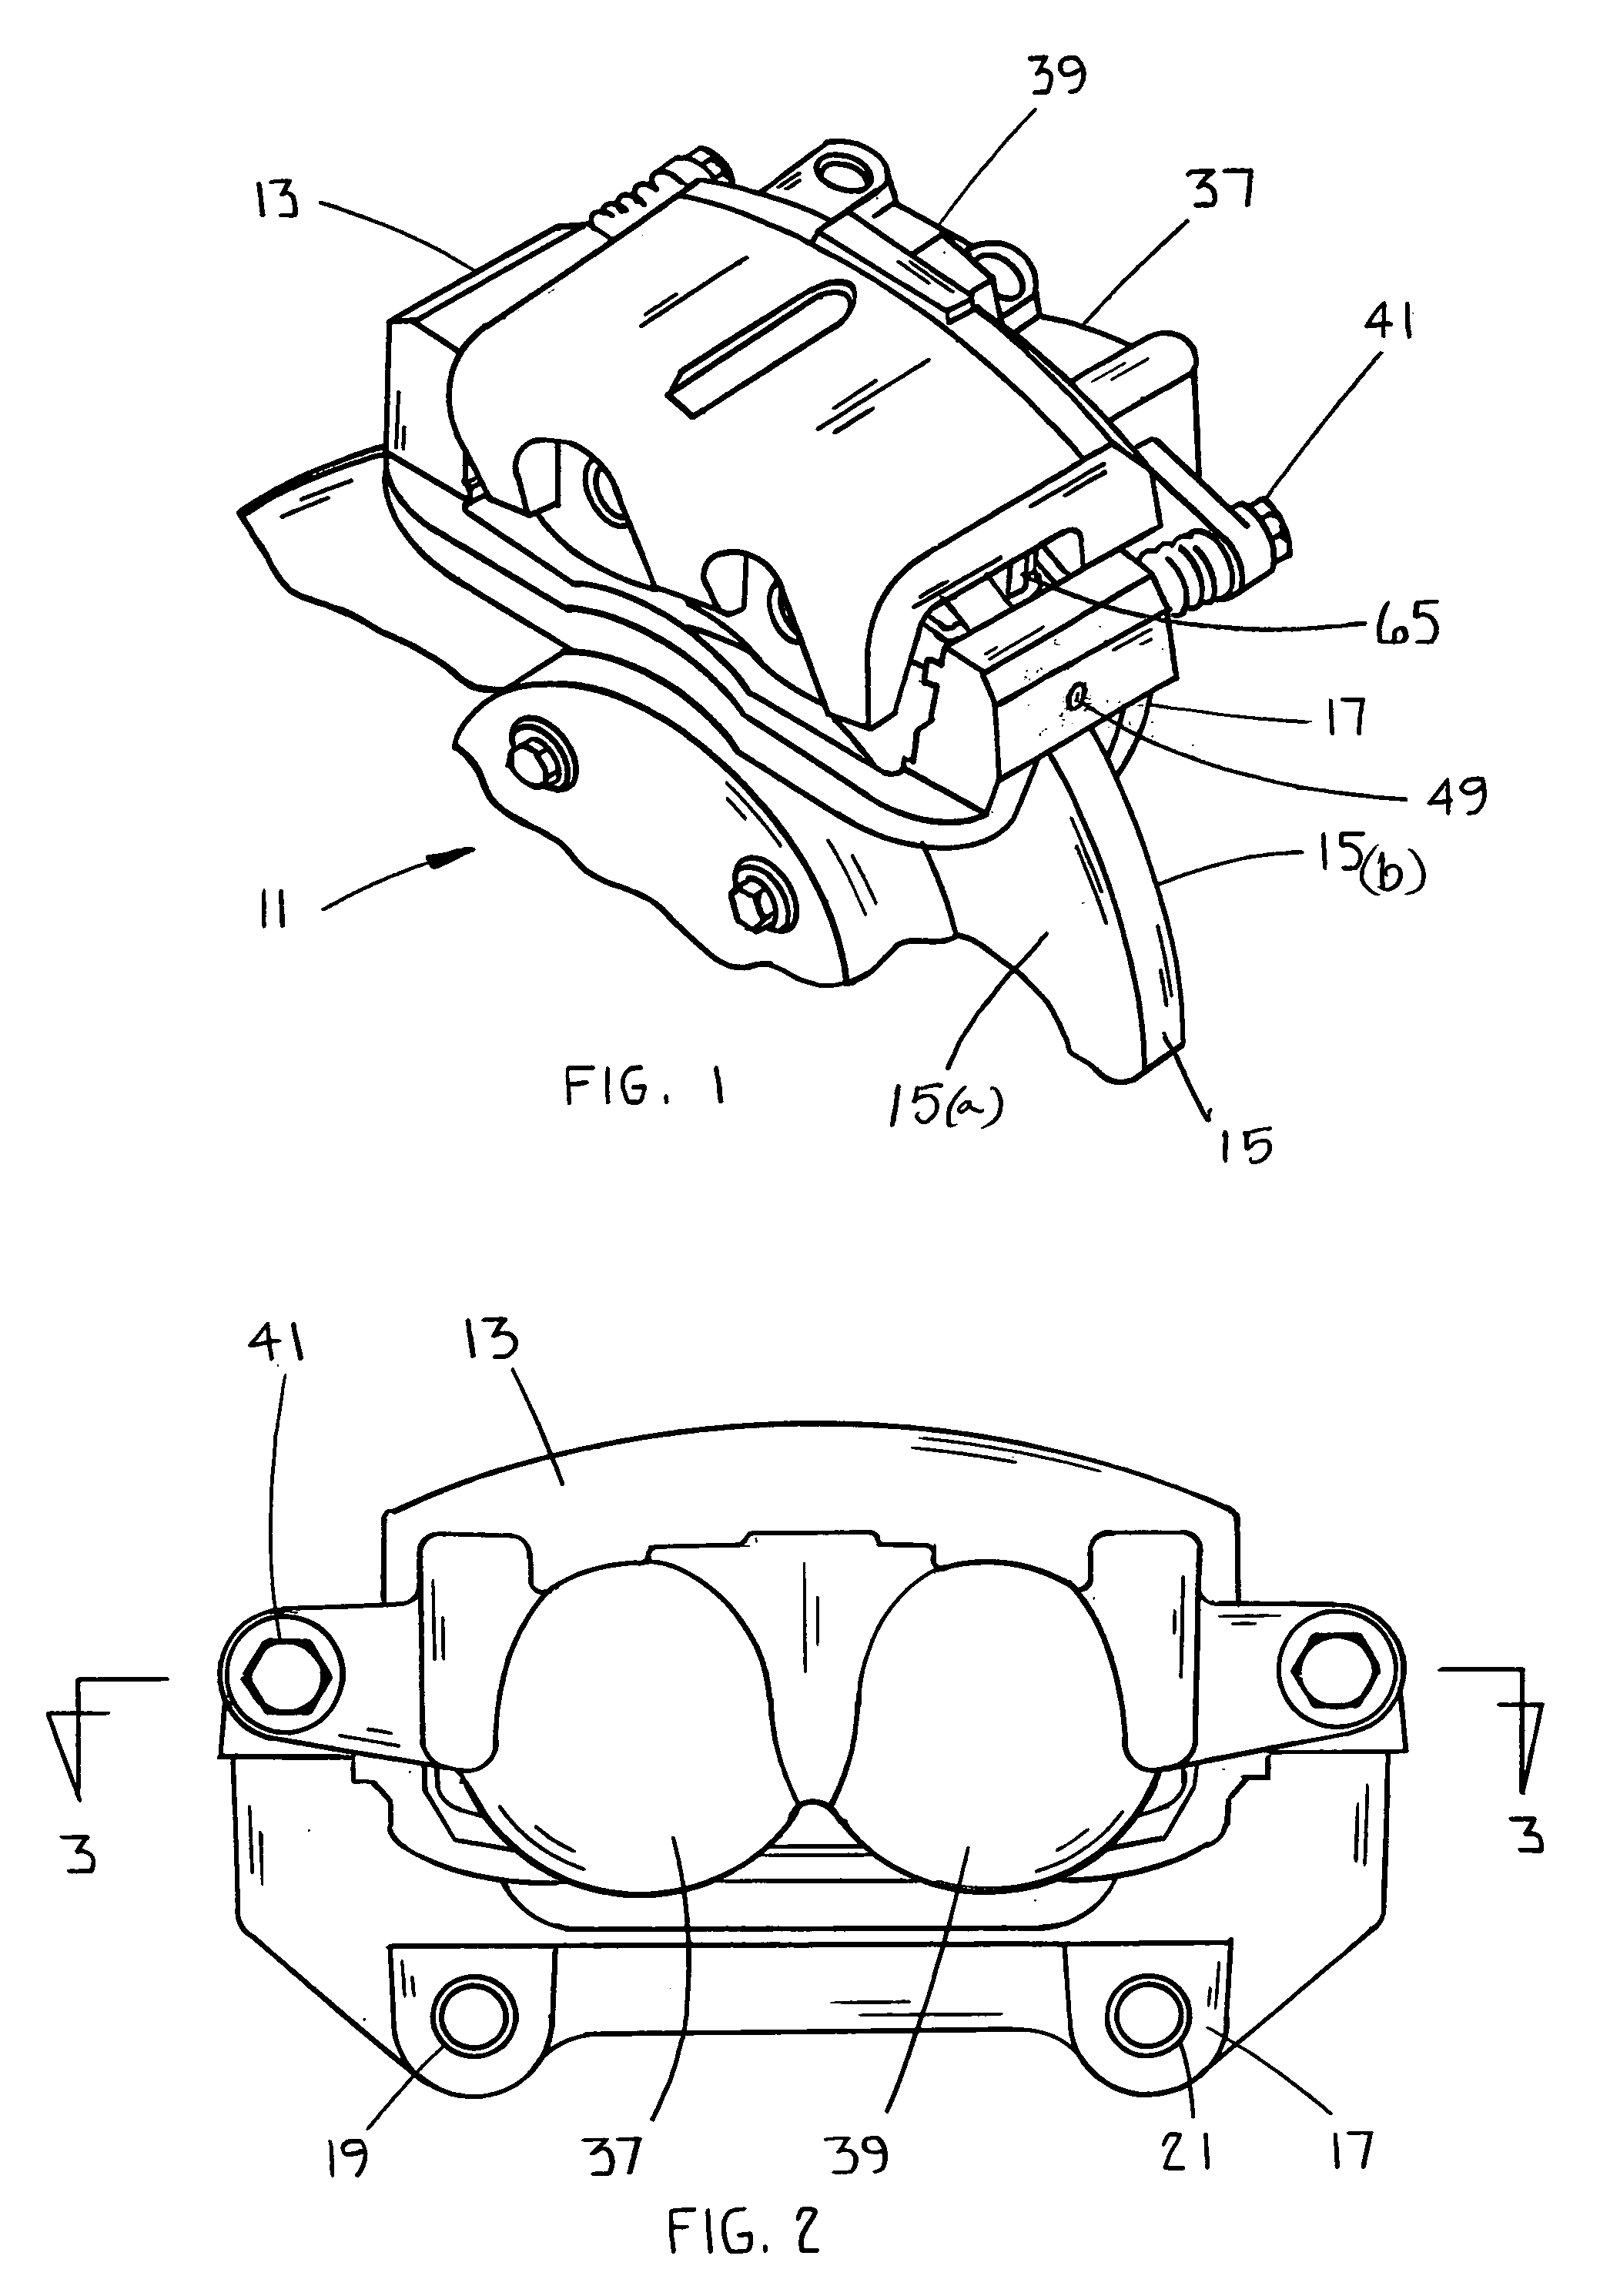 Method of forming bushings between guide pins and guide pin bores